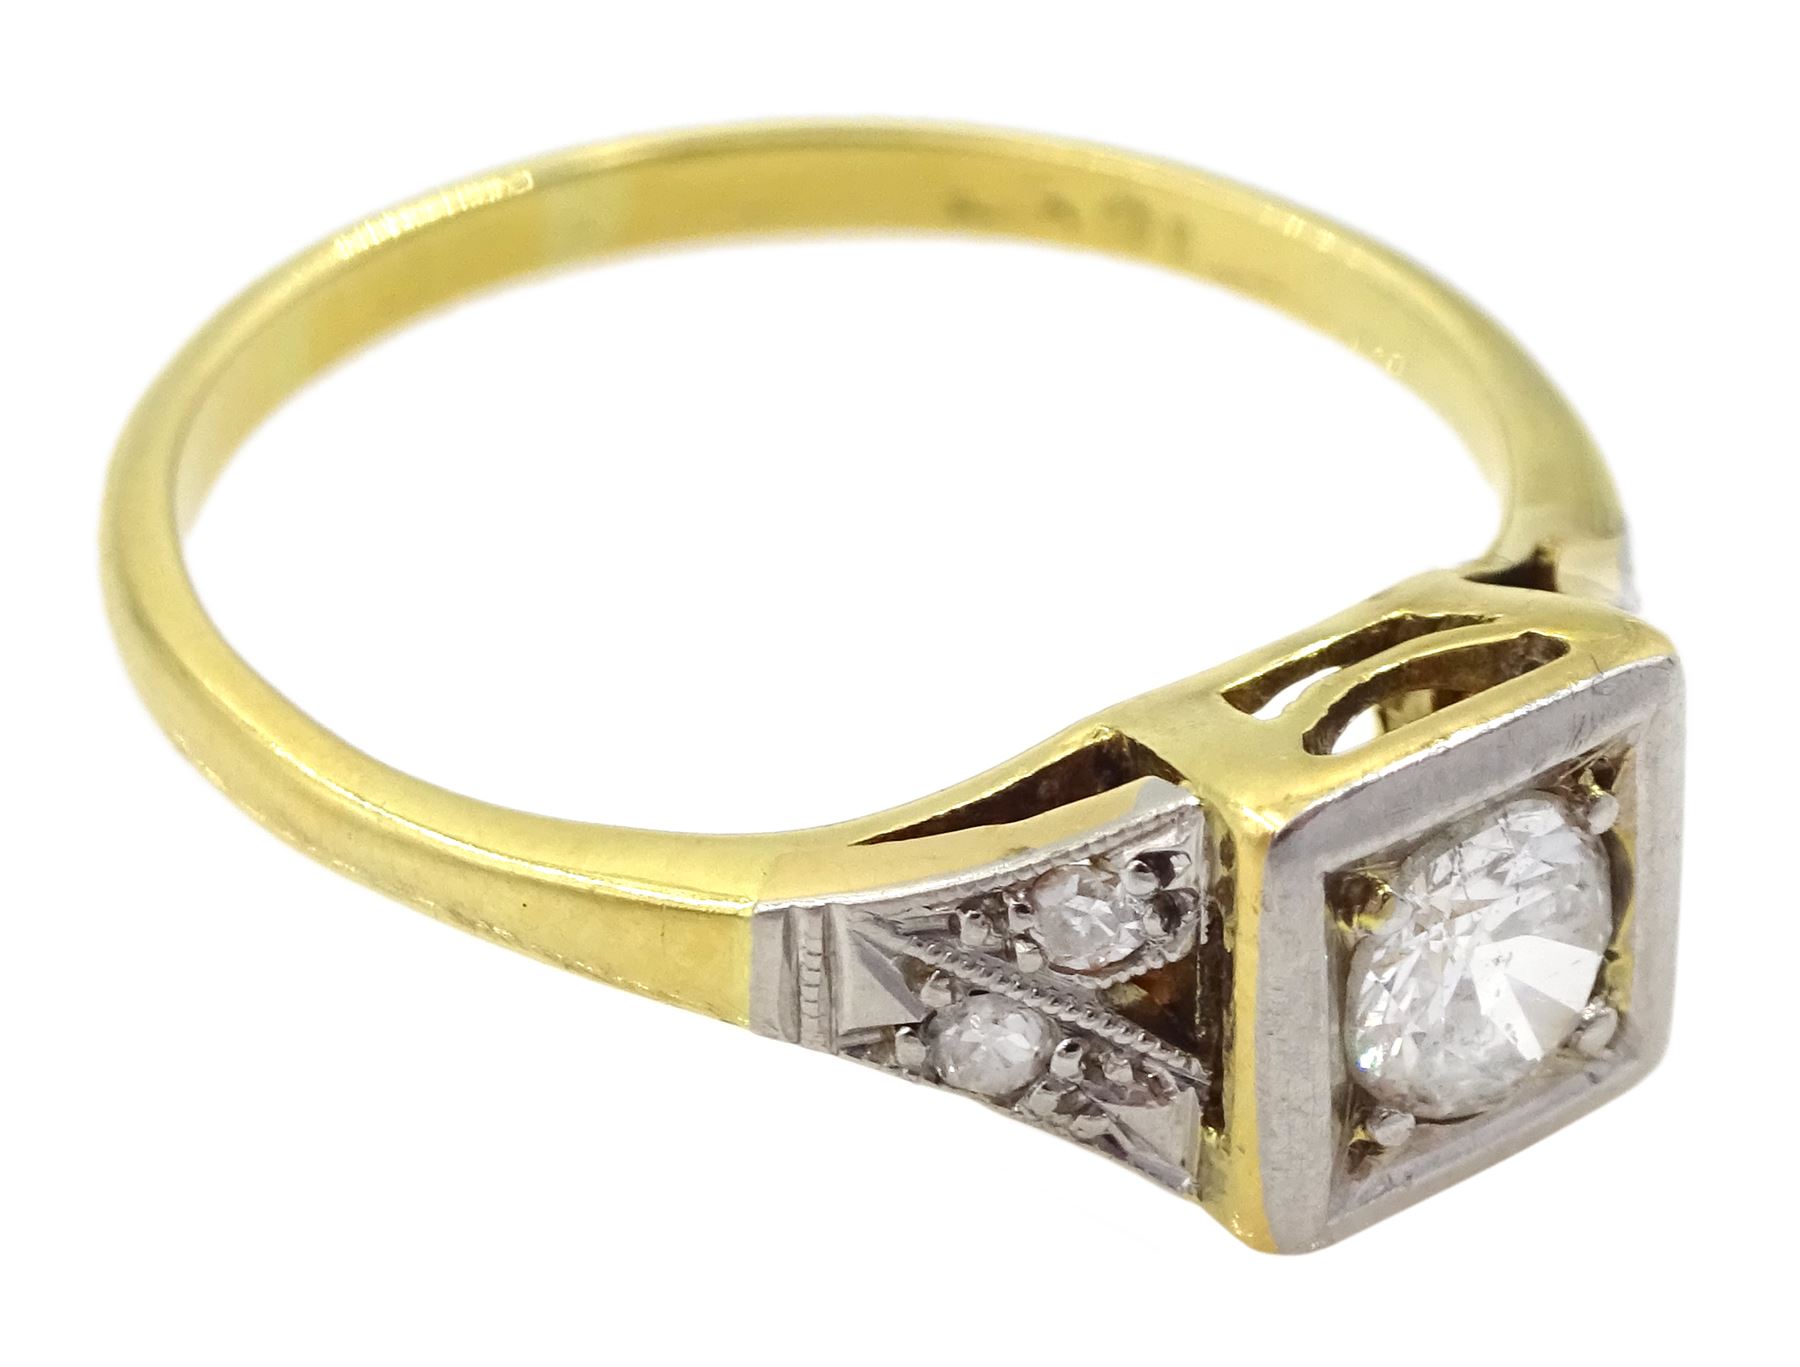 Early-mid 20th century 18ct gold single stone old cut diamond ring - Image 3 of 4